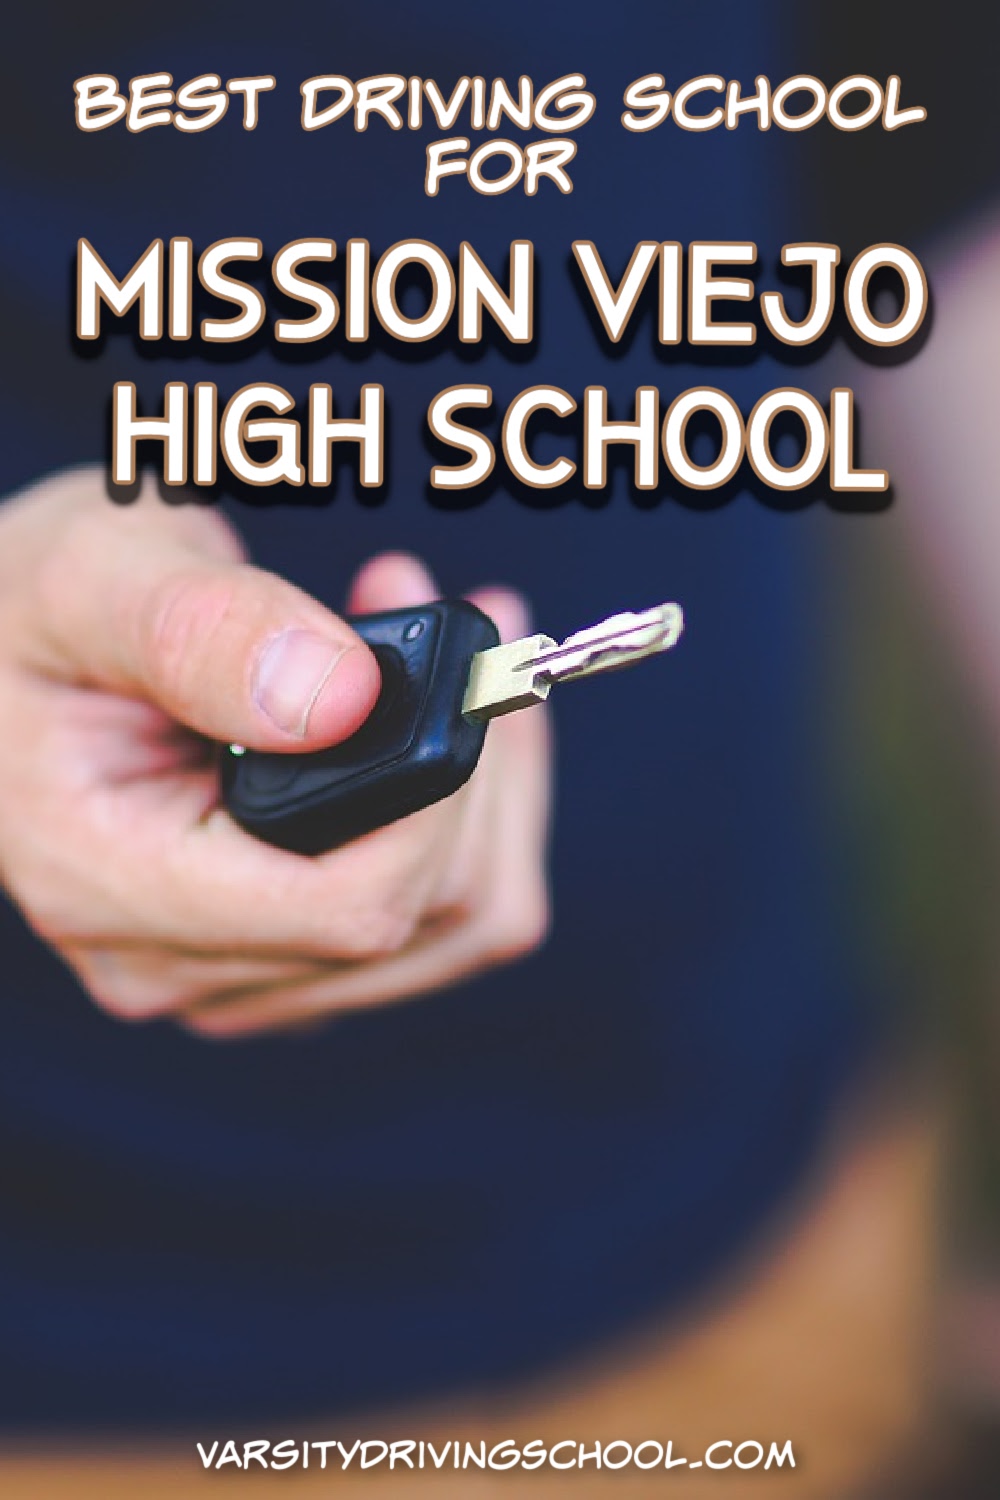 Varsity Driving School offers many different services that help make it the best Mission Viejo High School driving school.